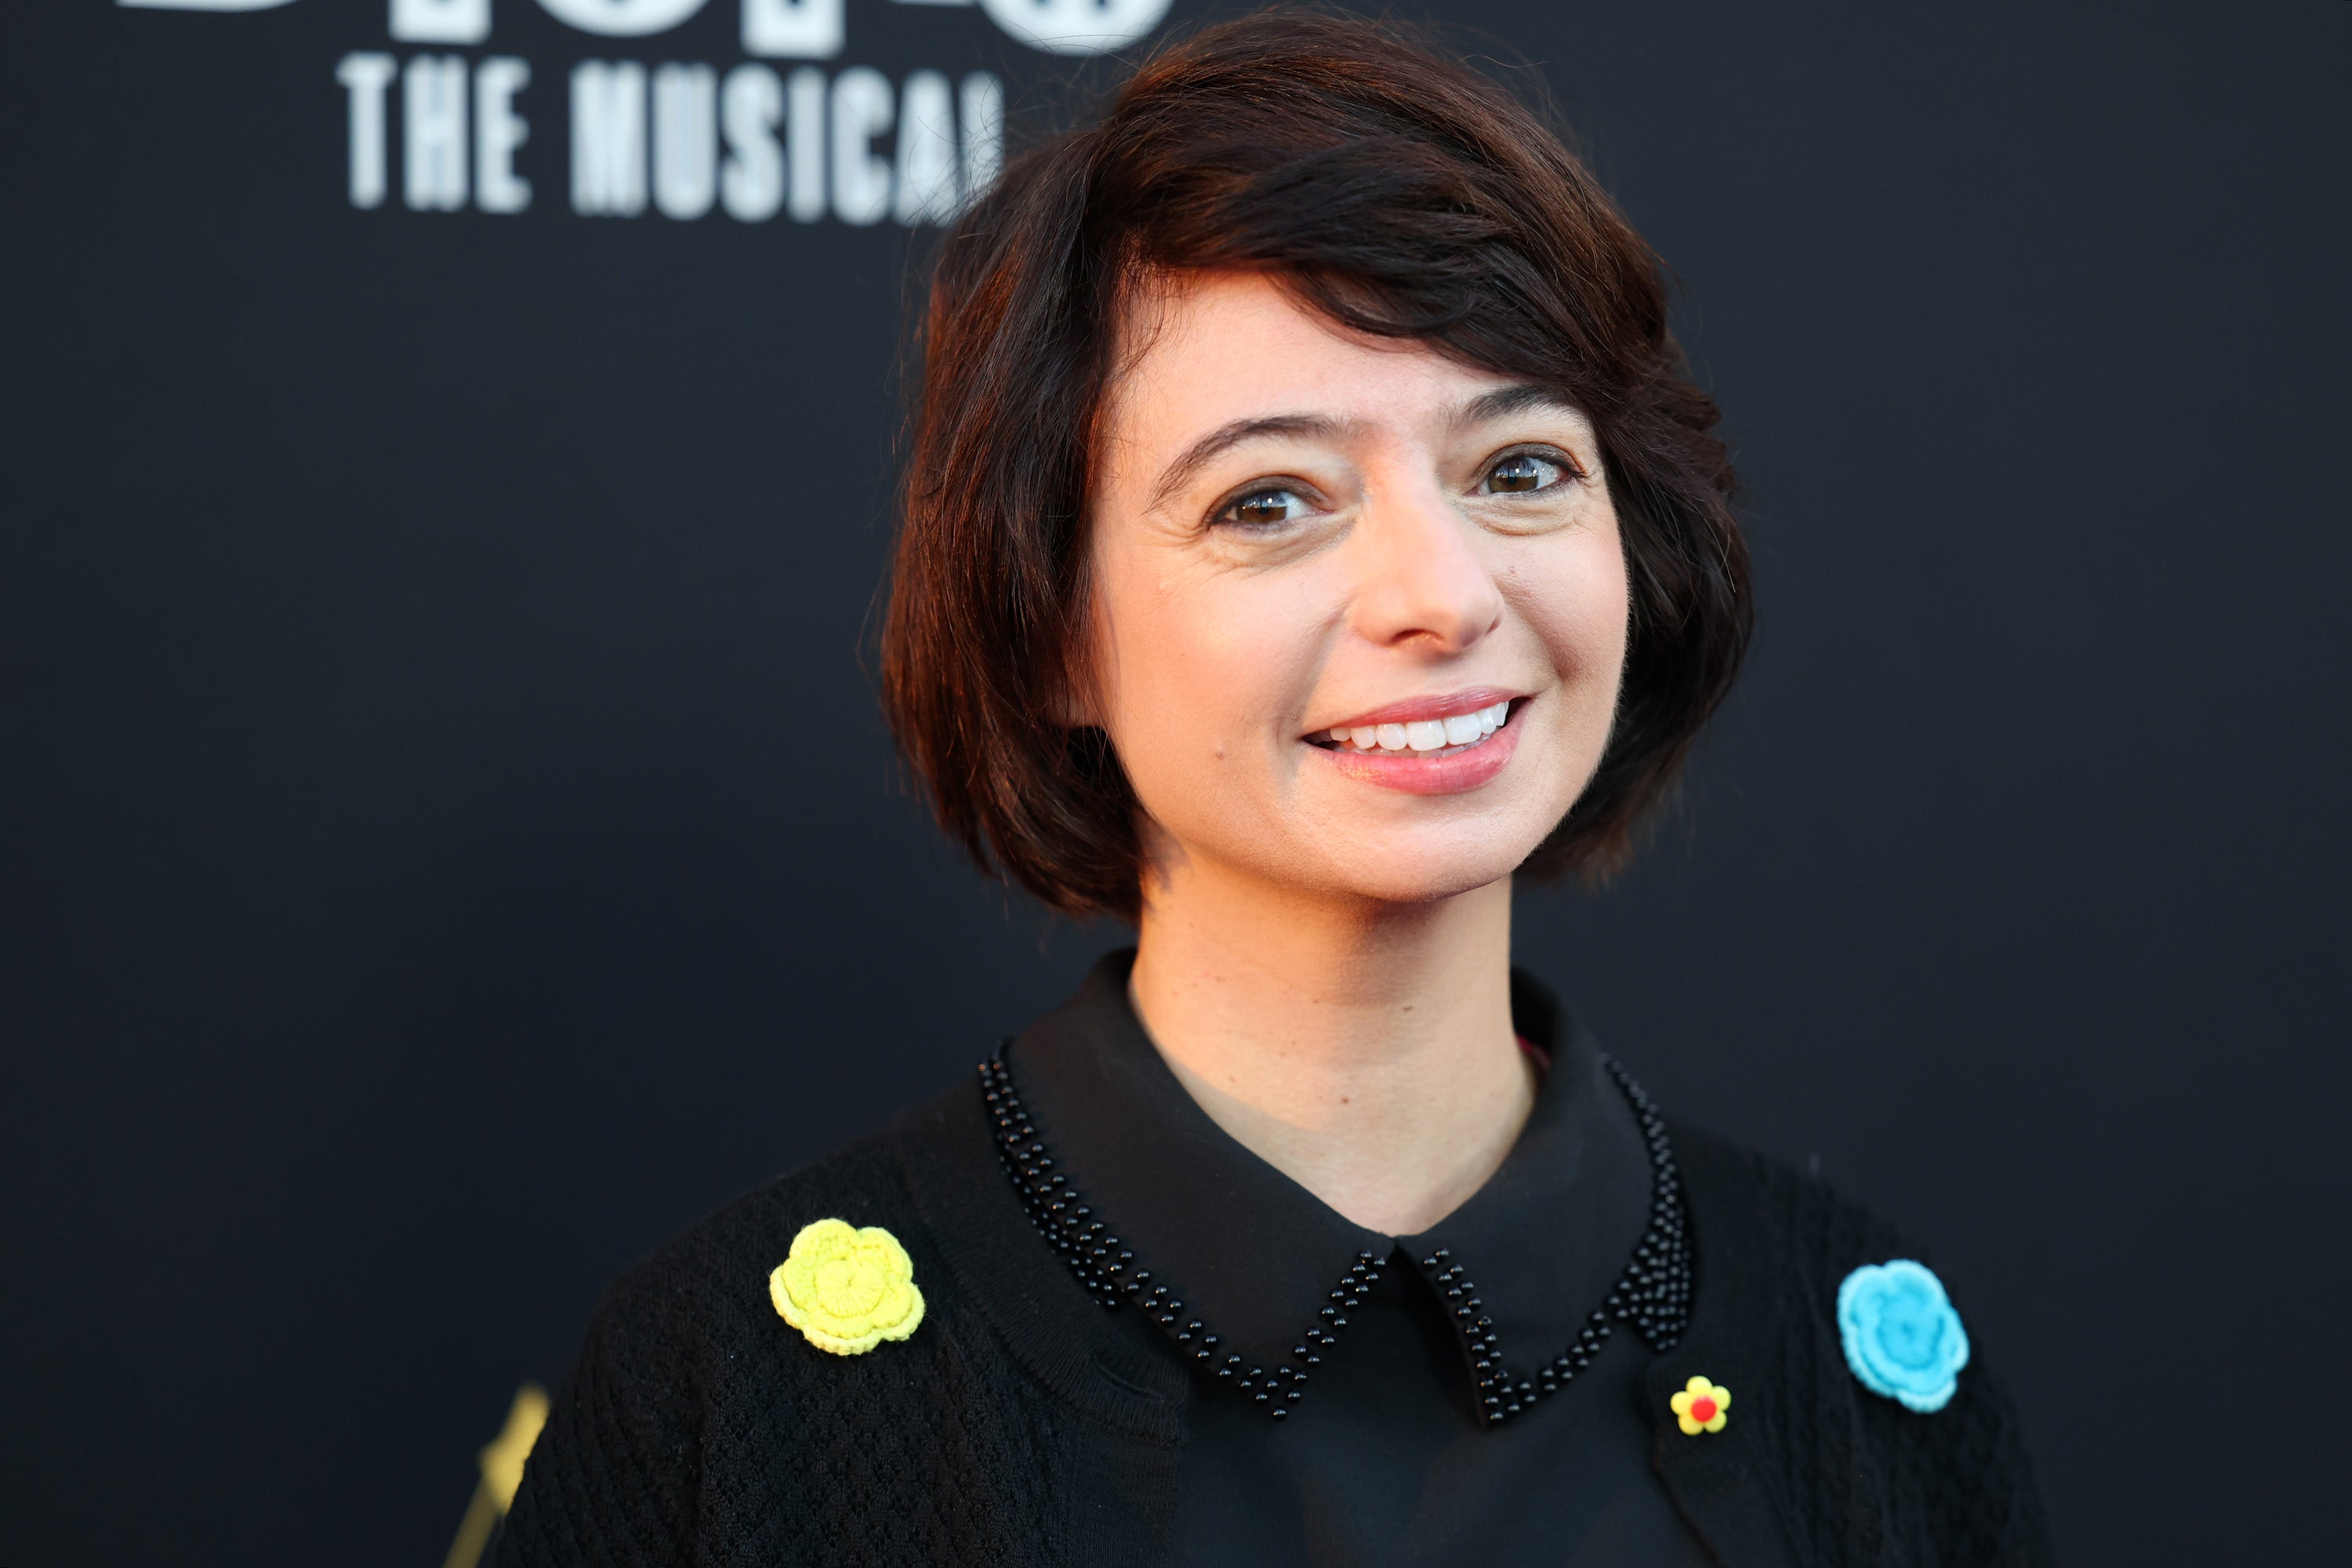 ‘Big Bang Theory’ star Kate Micucci is cancer-free after surgery: ‘Very lucky’